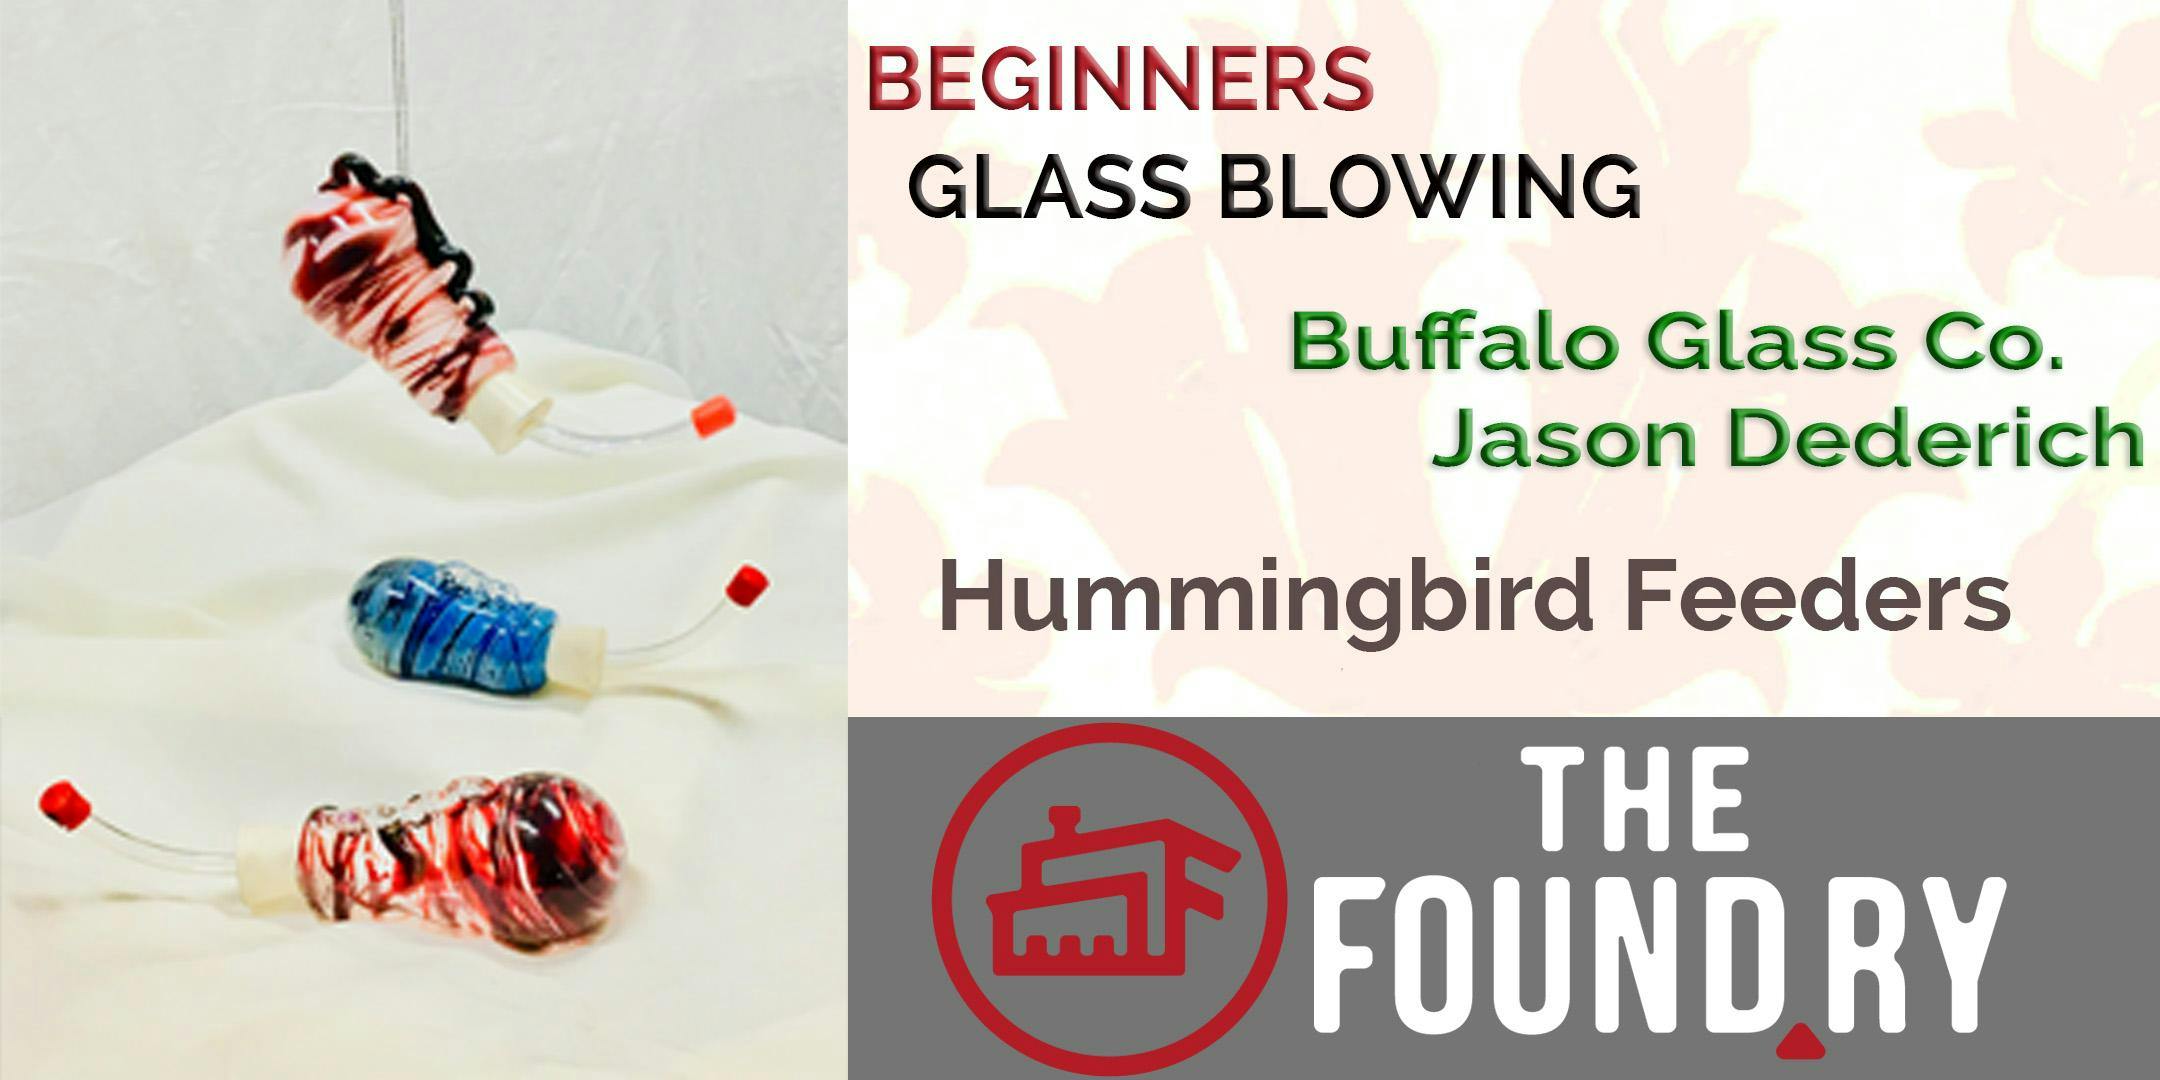 Beginning Glass Blowing - Afternoon Session at The Foundry (Hummingbird feeders)